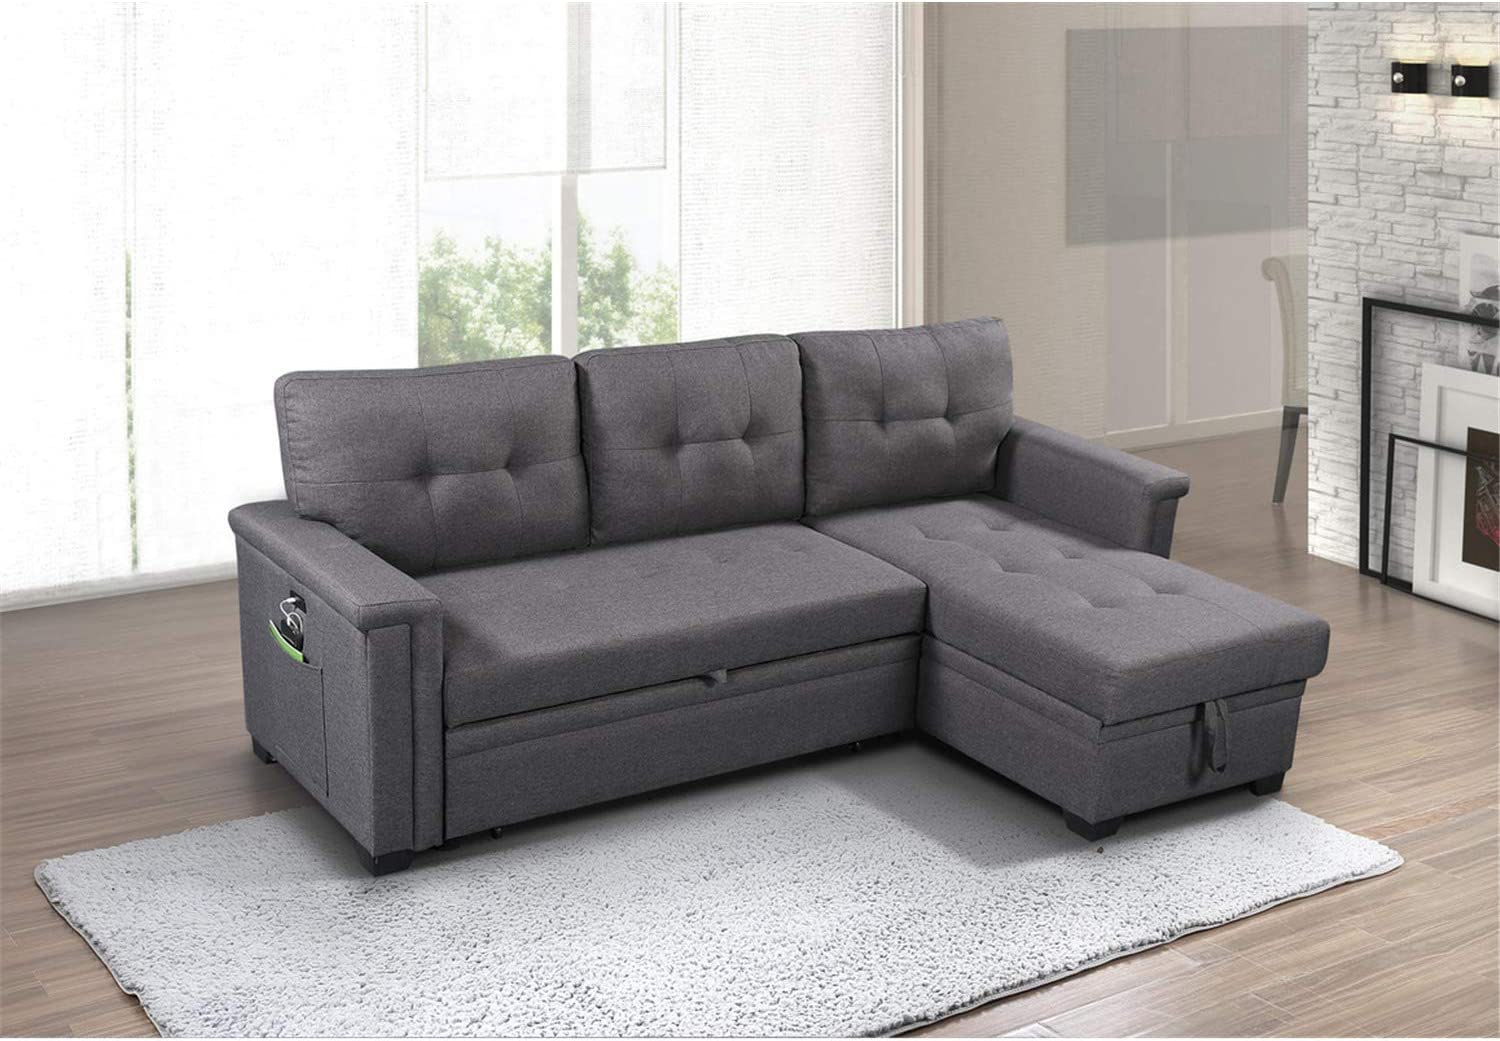 Lilola Home Reversible Sleeper Sectional Sofa with Storage Chaise and Pocket, Dark Gray